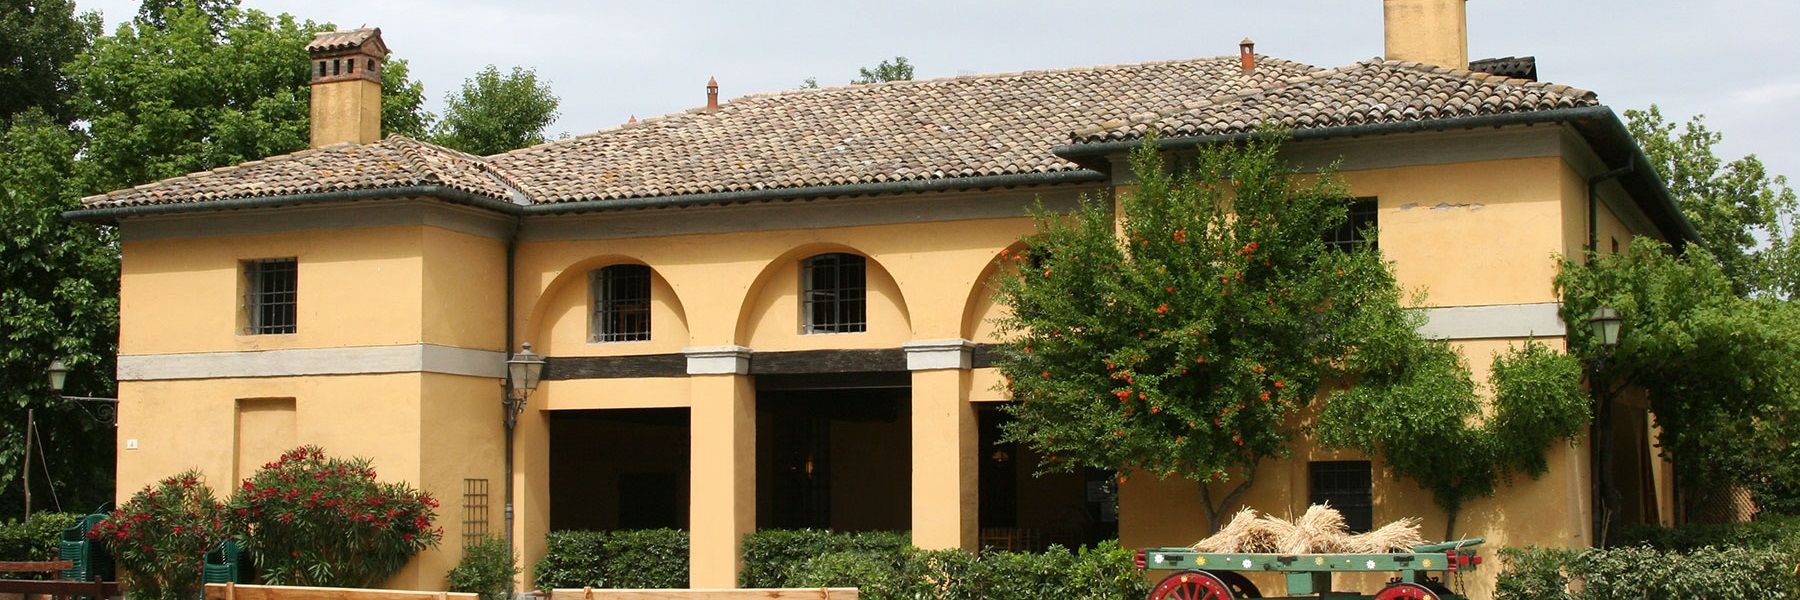 Guided tours of the Casa delle Aie and the Botanical Garden of Forgotten Fruits